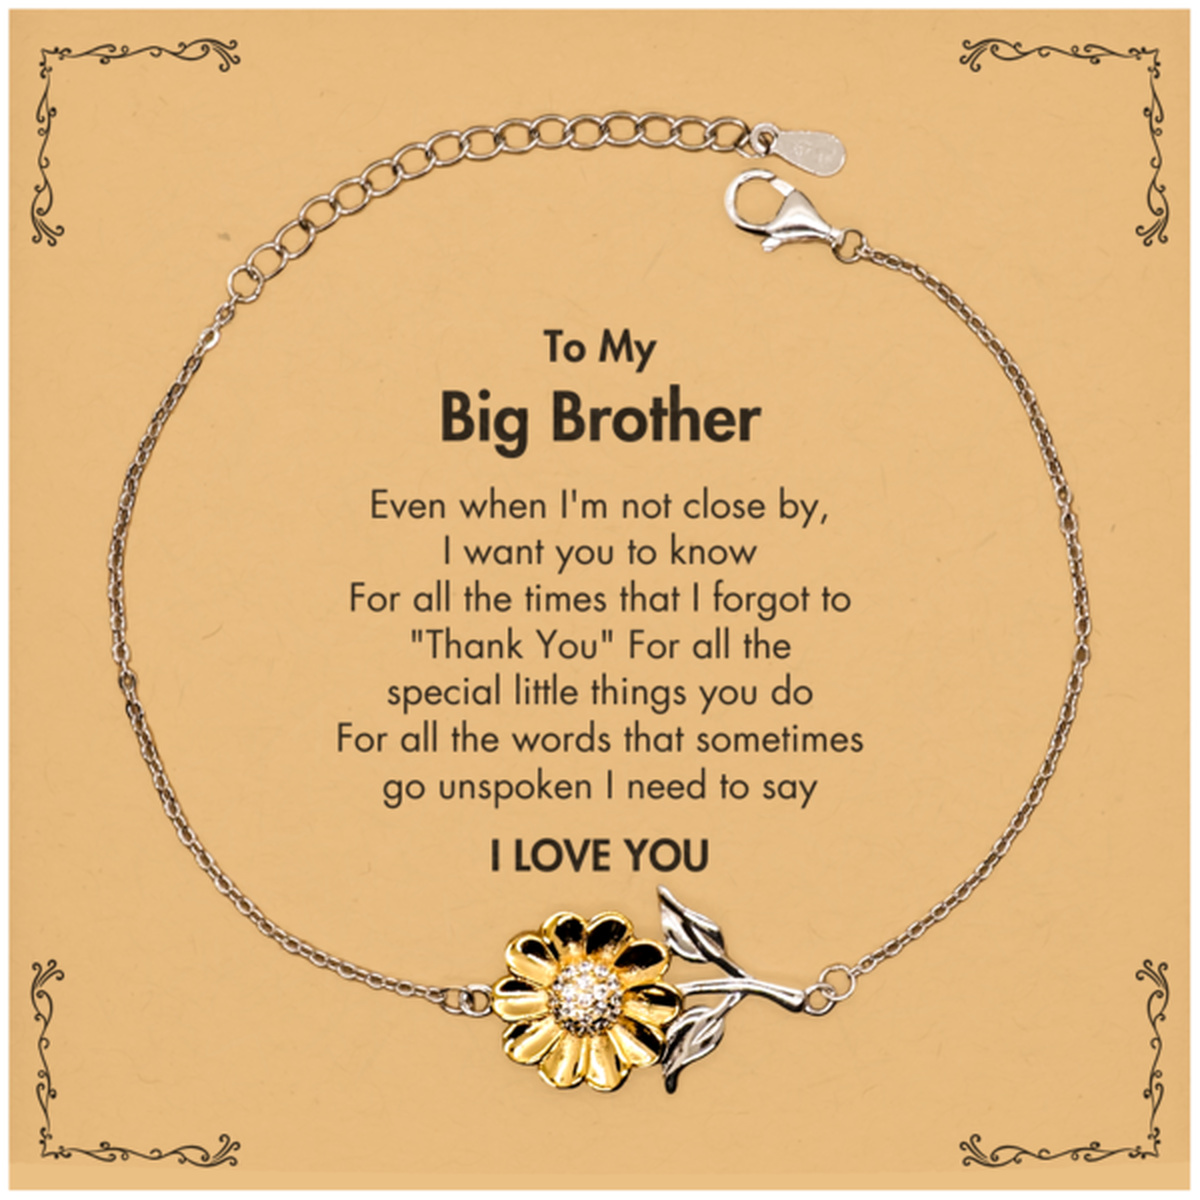 Thank You Gifts for Big Brother, Keepsake Sunflower Bracelet Gifts for Big Brother Birthday Mother's day Father's Day Big Brother For all the words That sometimes go unspoken I need to say I LOVE YOU